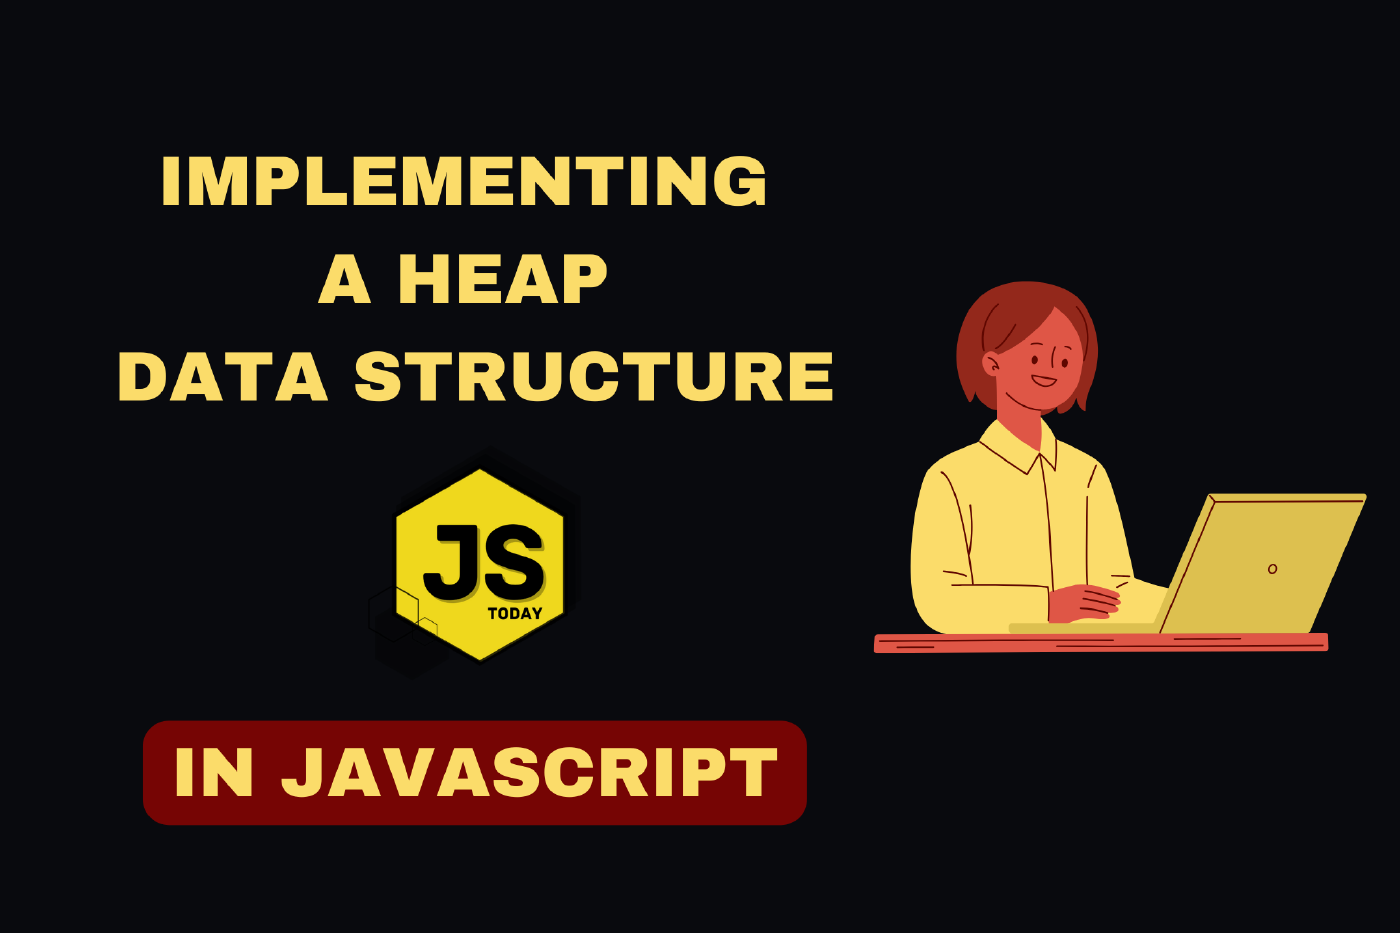 Implementing a Heap Data Stucture in JavaScript